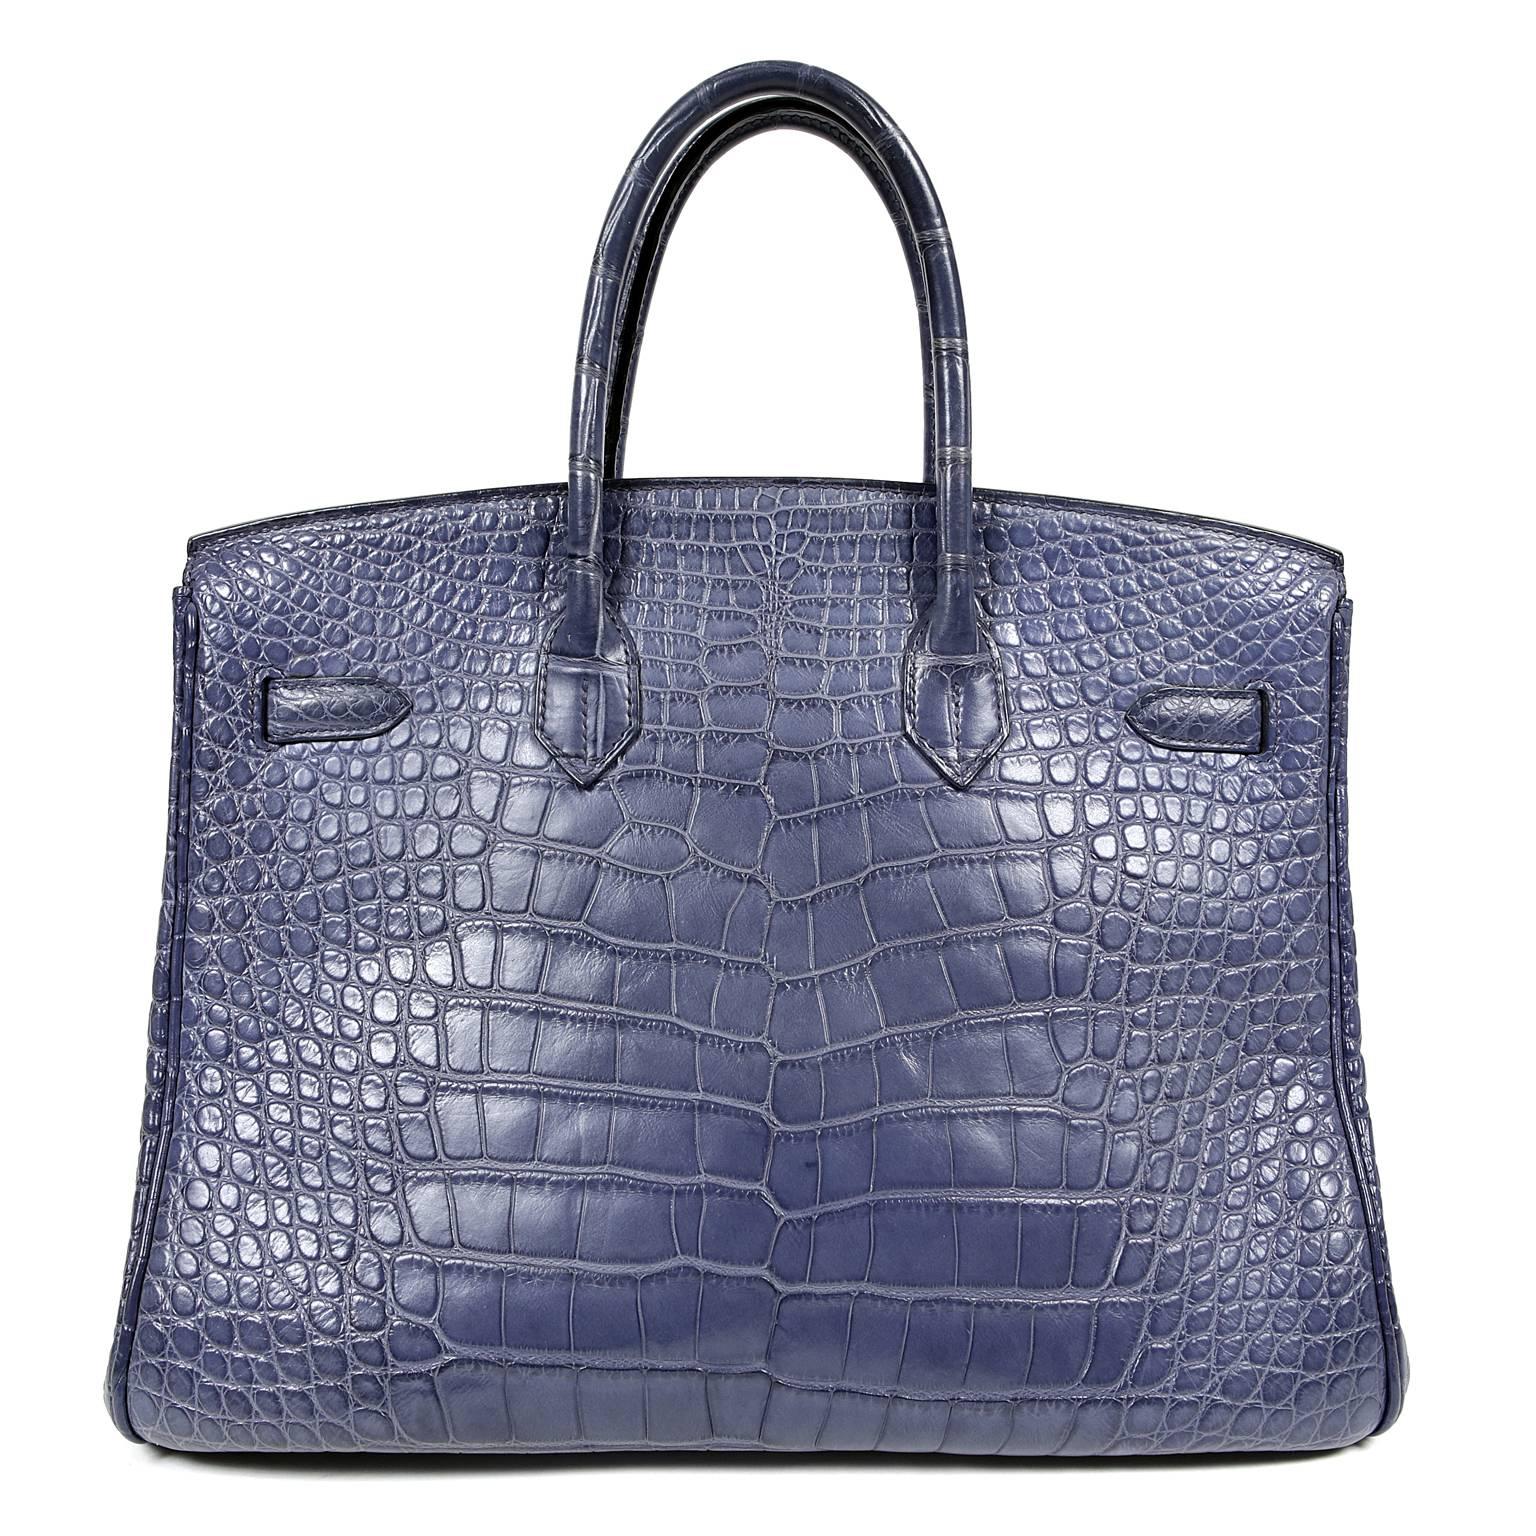 Hermès 35 cm Brighton Blue Alligator Birkin Bag- PRISTINE
Hermès bags are considered the ultimate luxury item the world over.  Hand stitched by skilled craftsmen, wait lists of a year or more are commonplace for the leather versions.  An exotic